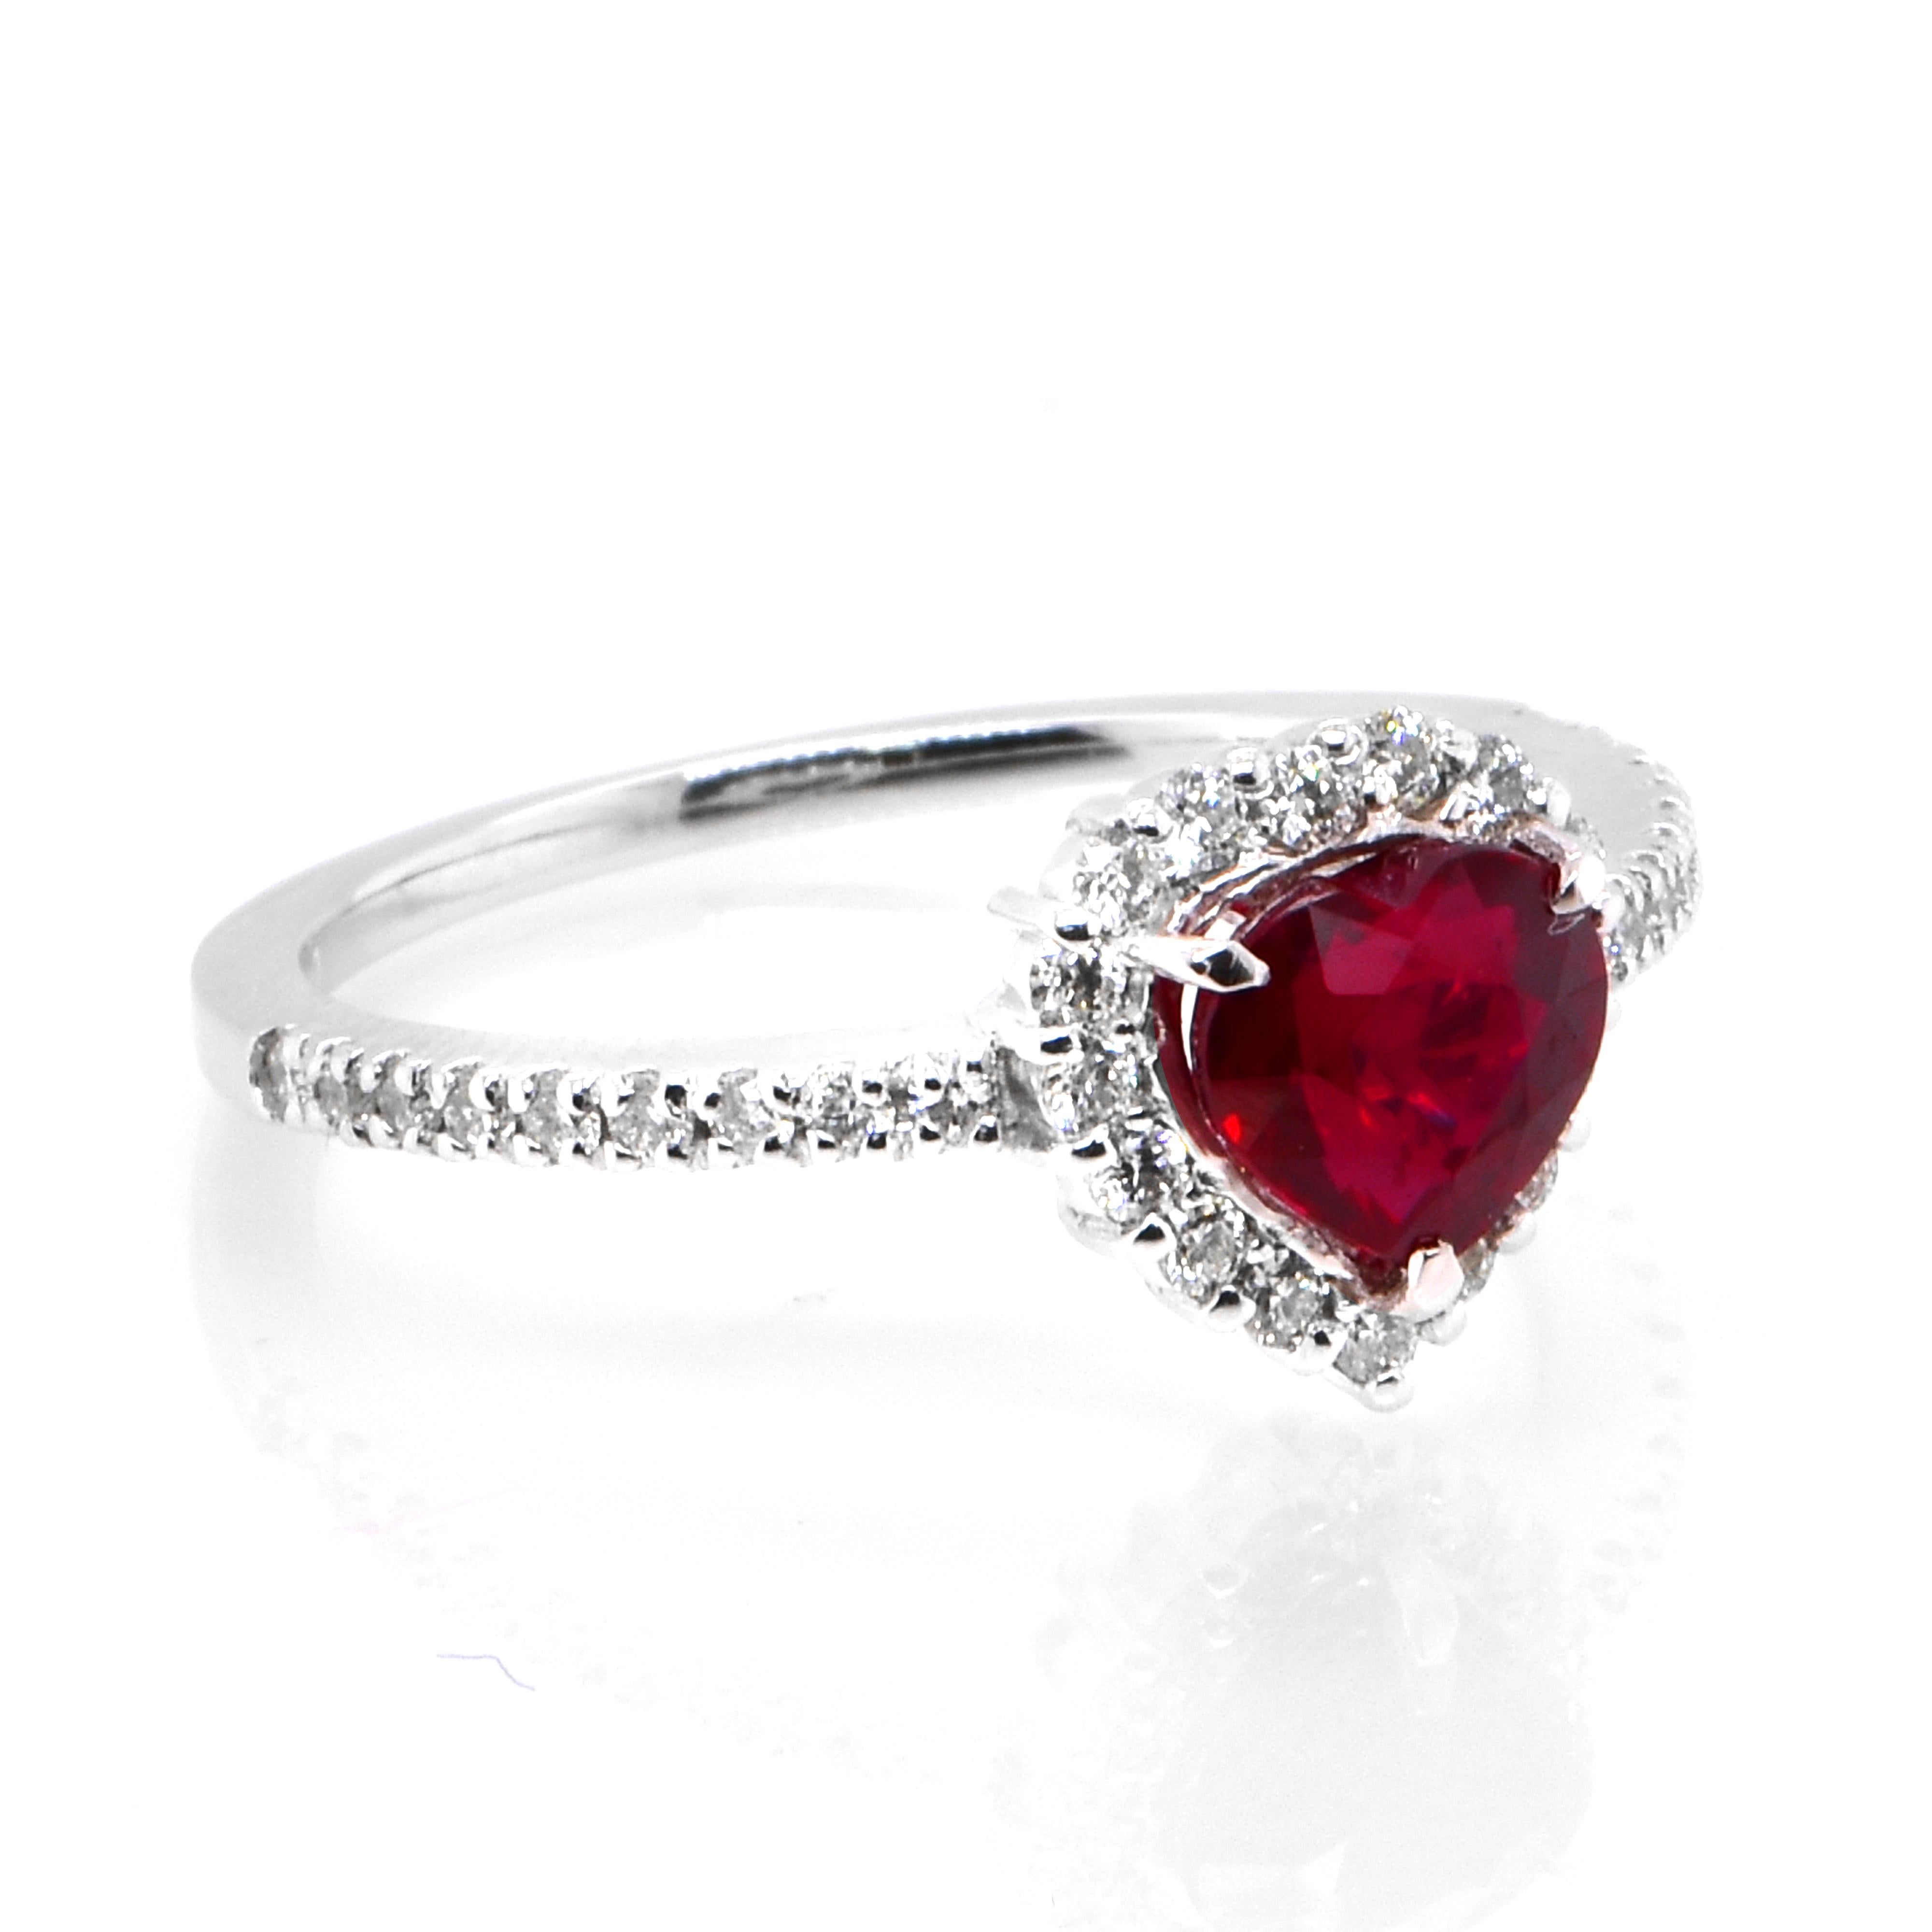 Modern GIA Certified 1.01 Carat, Pigeon Blood Red, Burmese Ruby Ring Made in Platinum For Sale